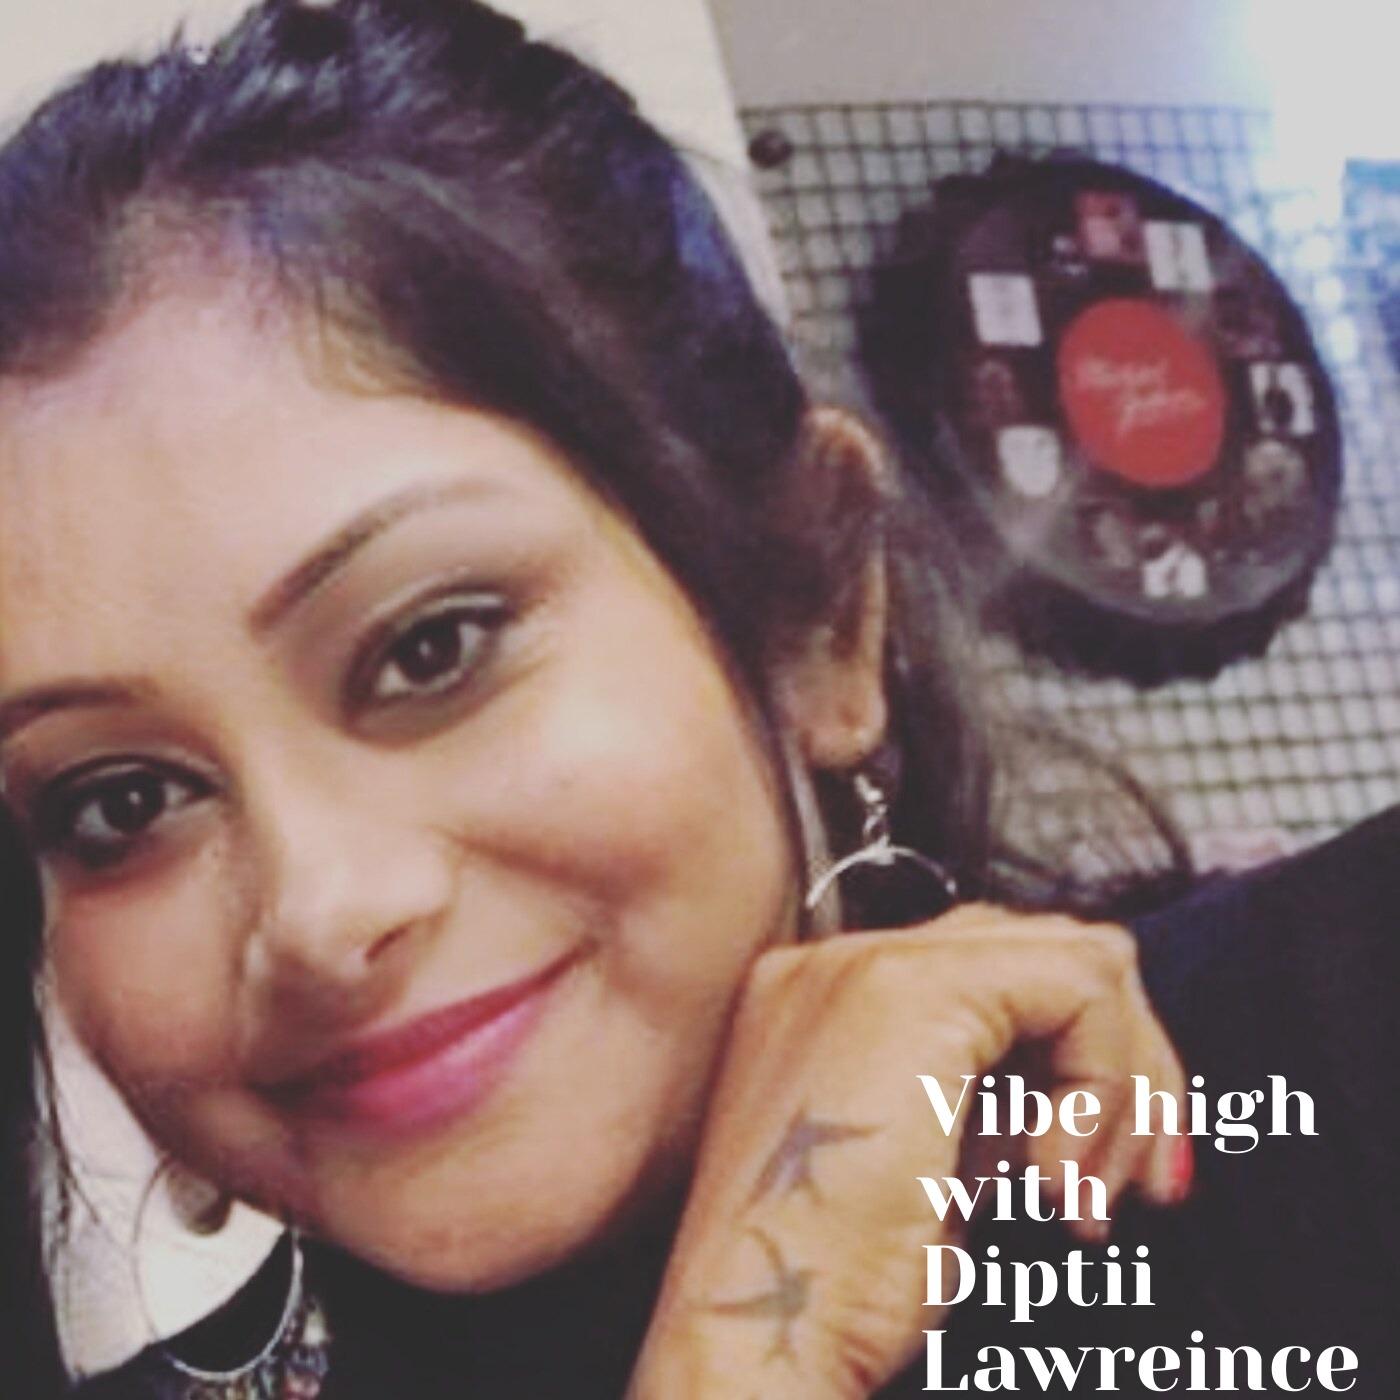 Vibe high with Diptii Lawreince